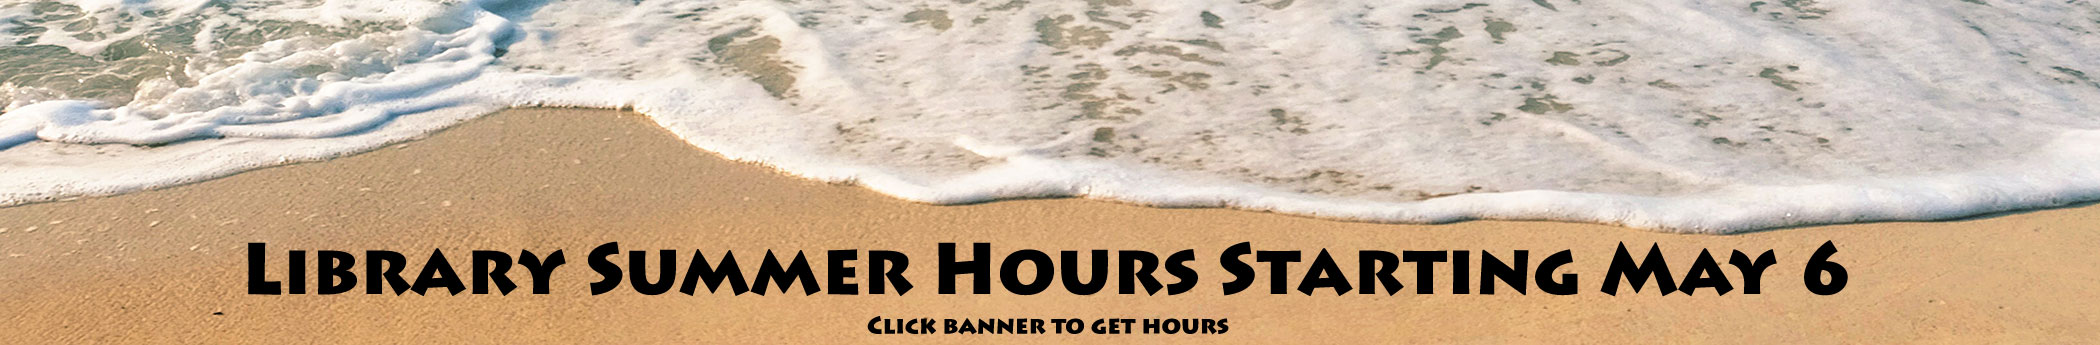 summer hours - click on banner